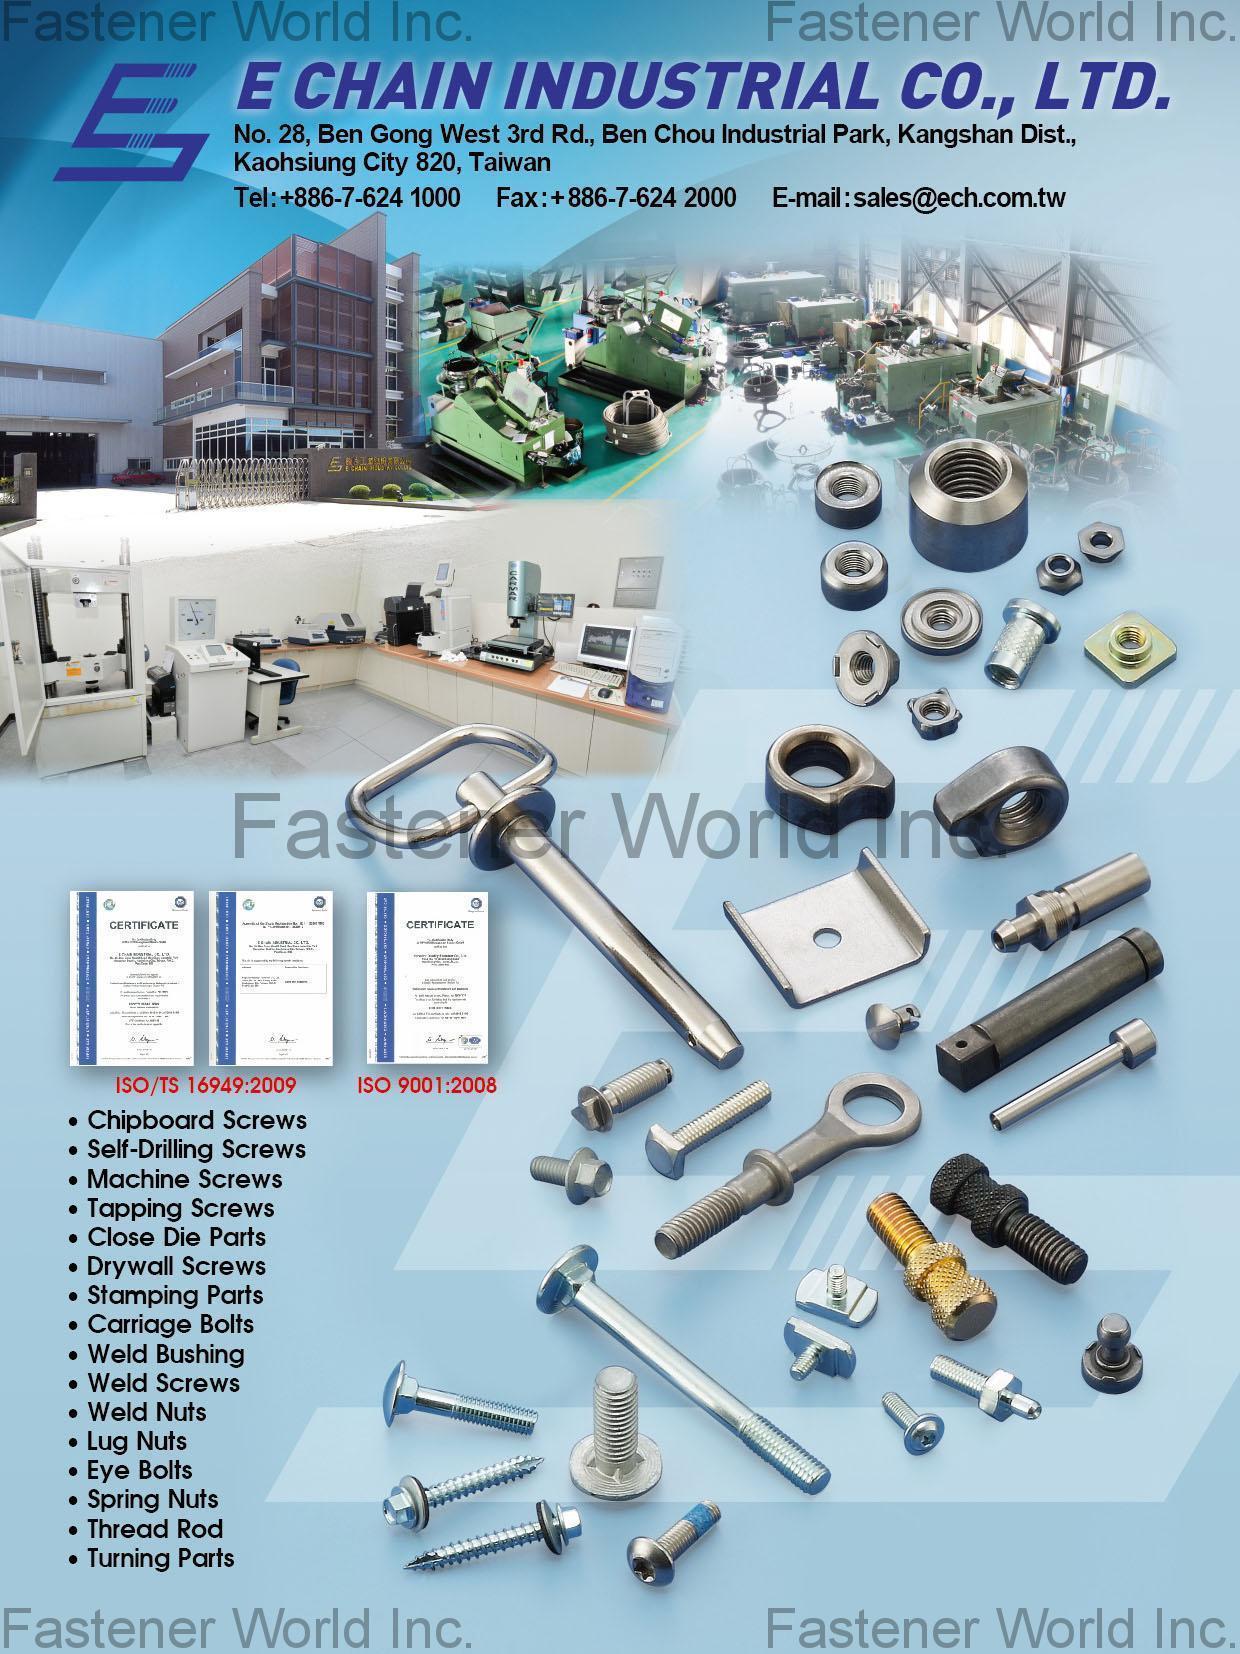 E CHAIN INDUSTRIAL CO., LTD. , Chipboard Screws, Self-Drilling Screws, Machine Screws, Tapping Screws, Close Die Parts, Drywall Screws, Stamping Parts, Carriage Bolts, Weld Bushing Weld Screws, Weld Nuts, Lug Nuts, Eye Bolts, Spring Nuts, Thread Rod, Turning Parts , Turning Parts